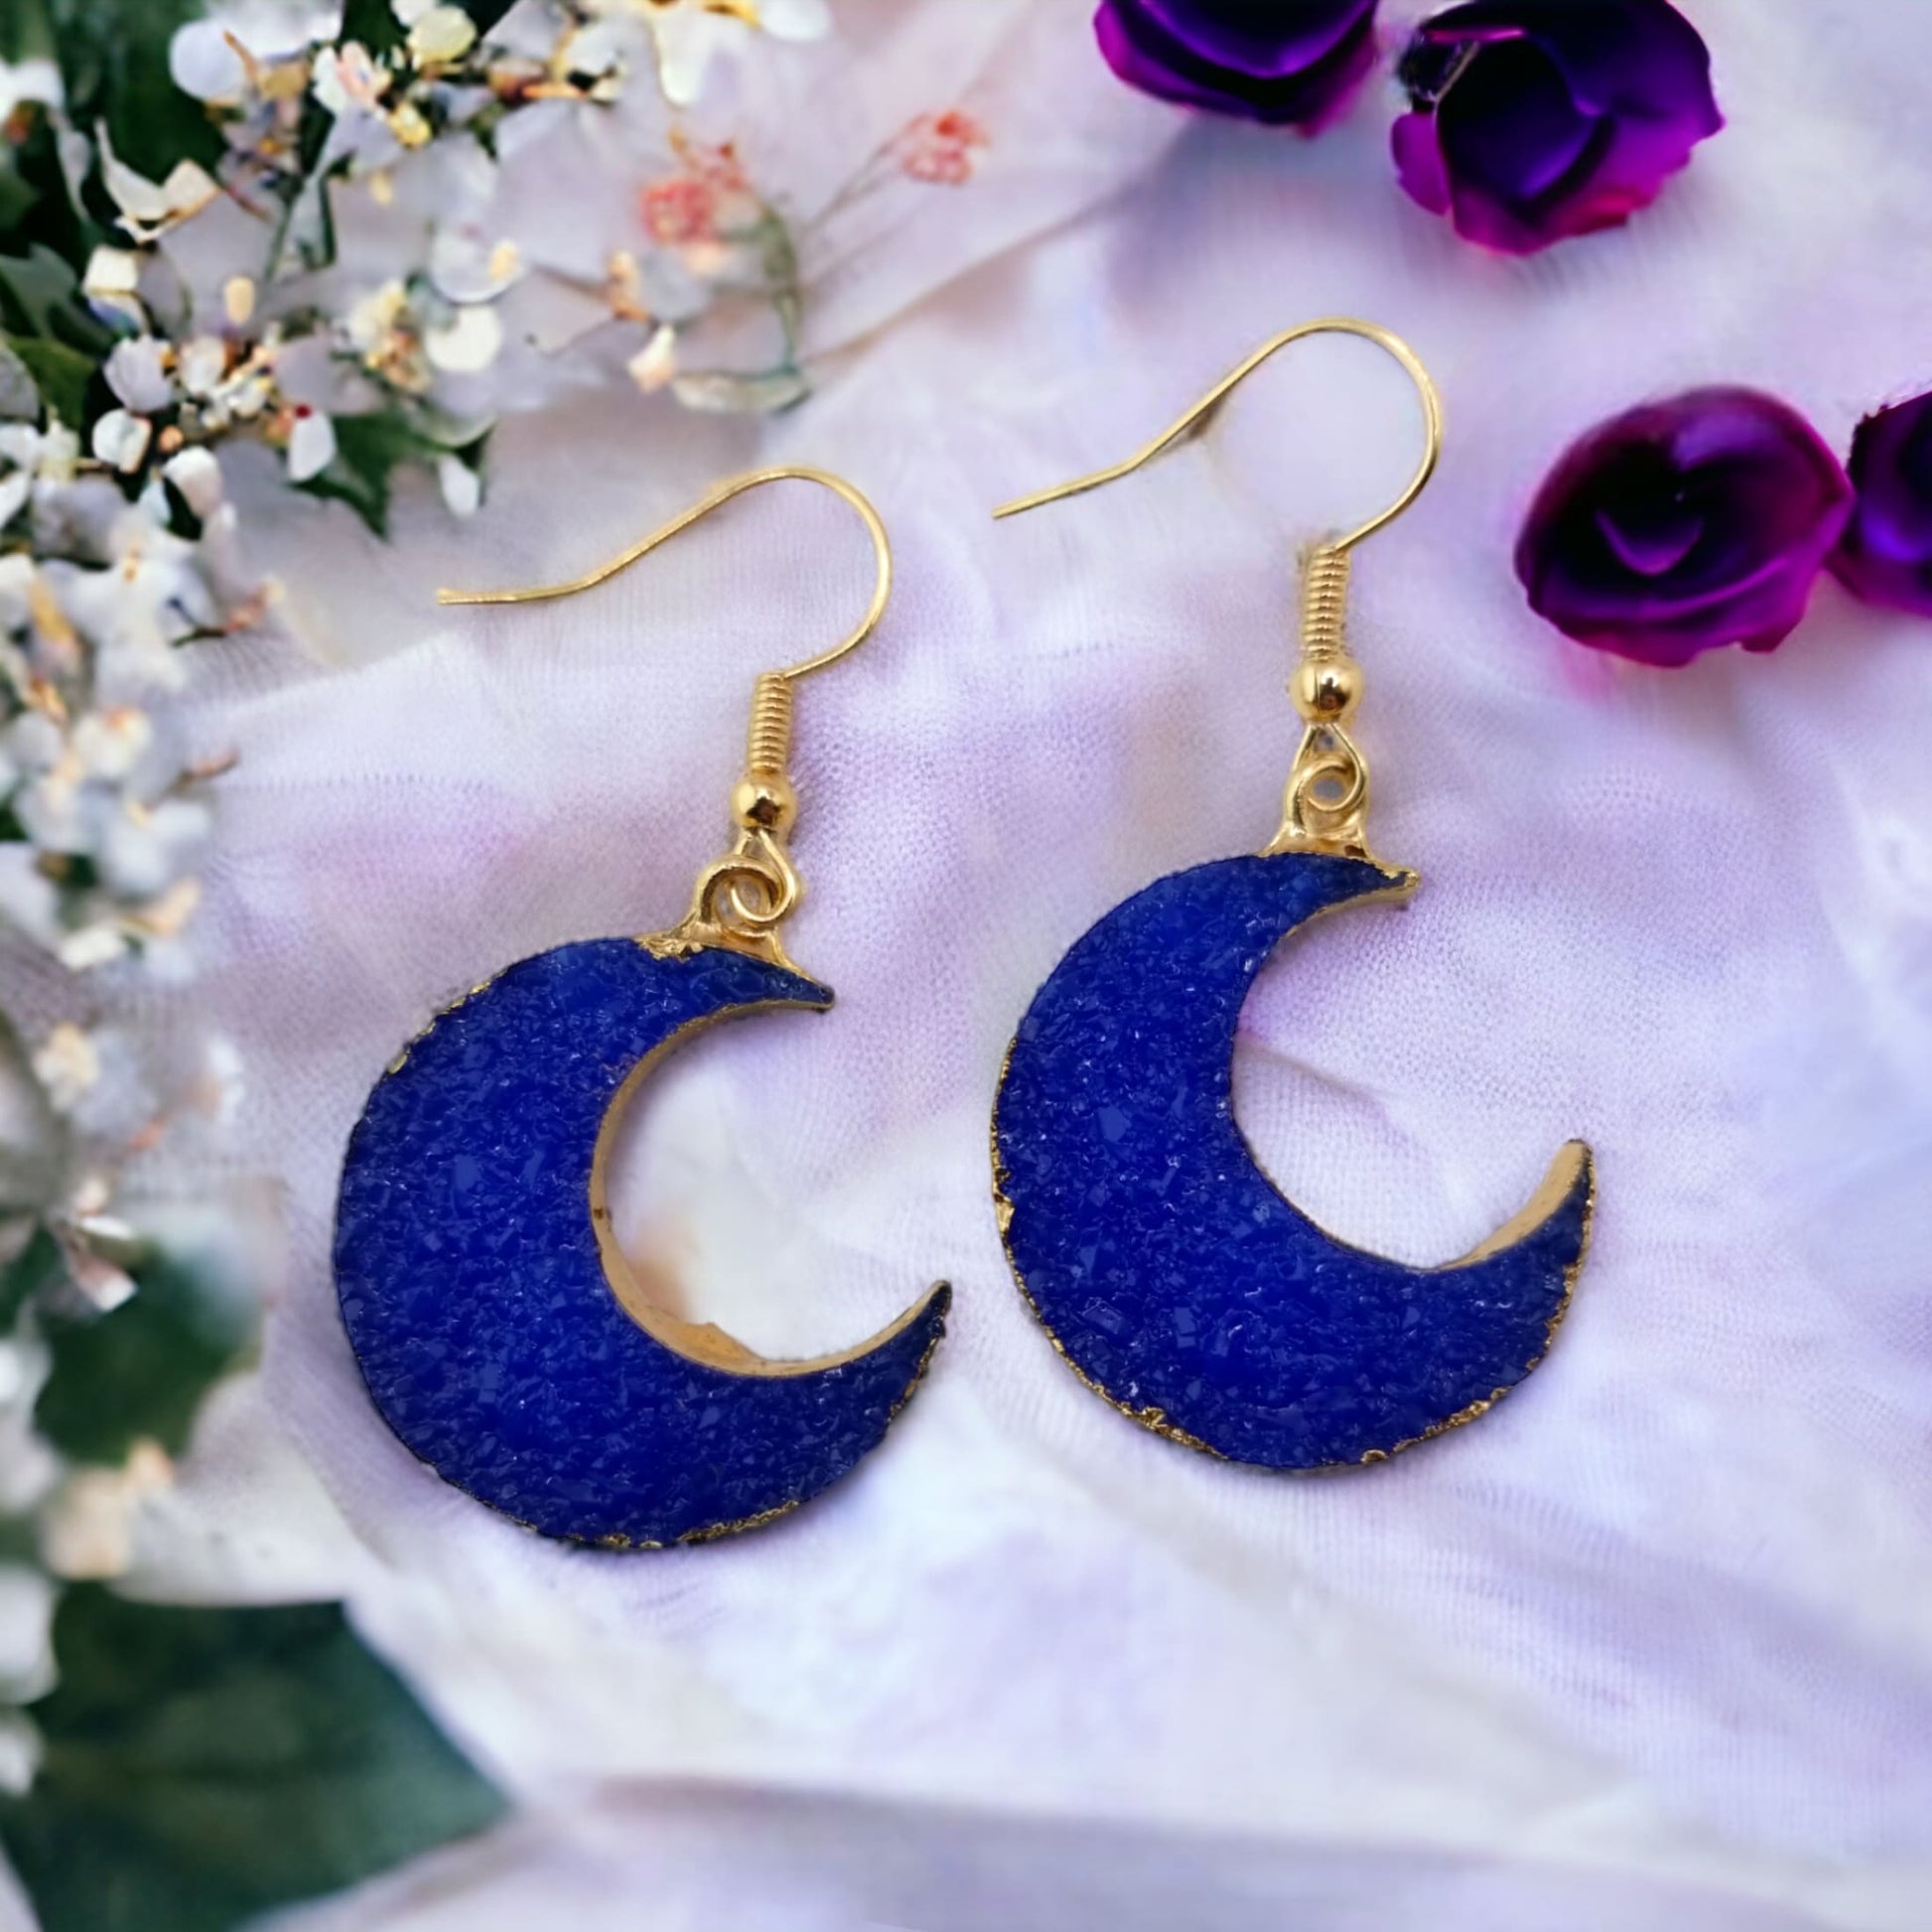 Sapphire Crescent Moon Earrings from Confetti Kitty, Only 7.99